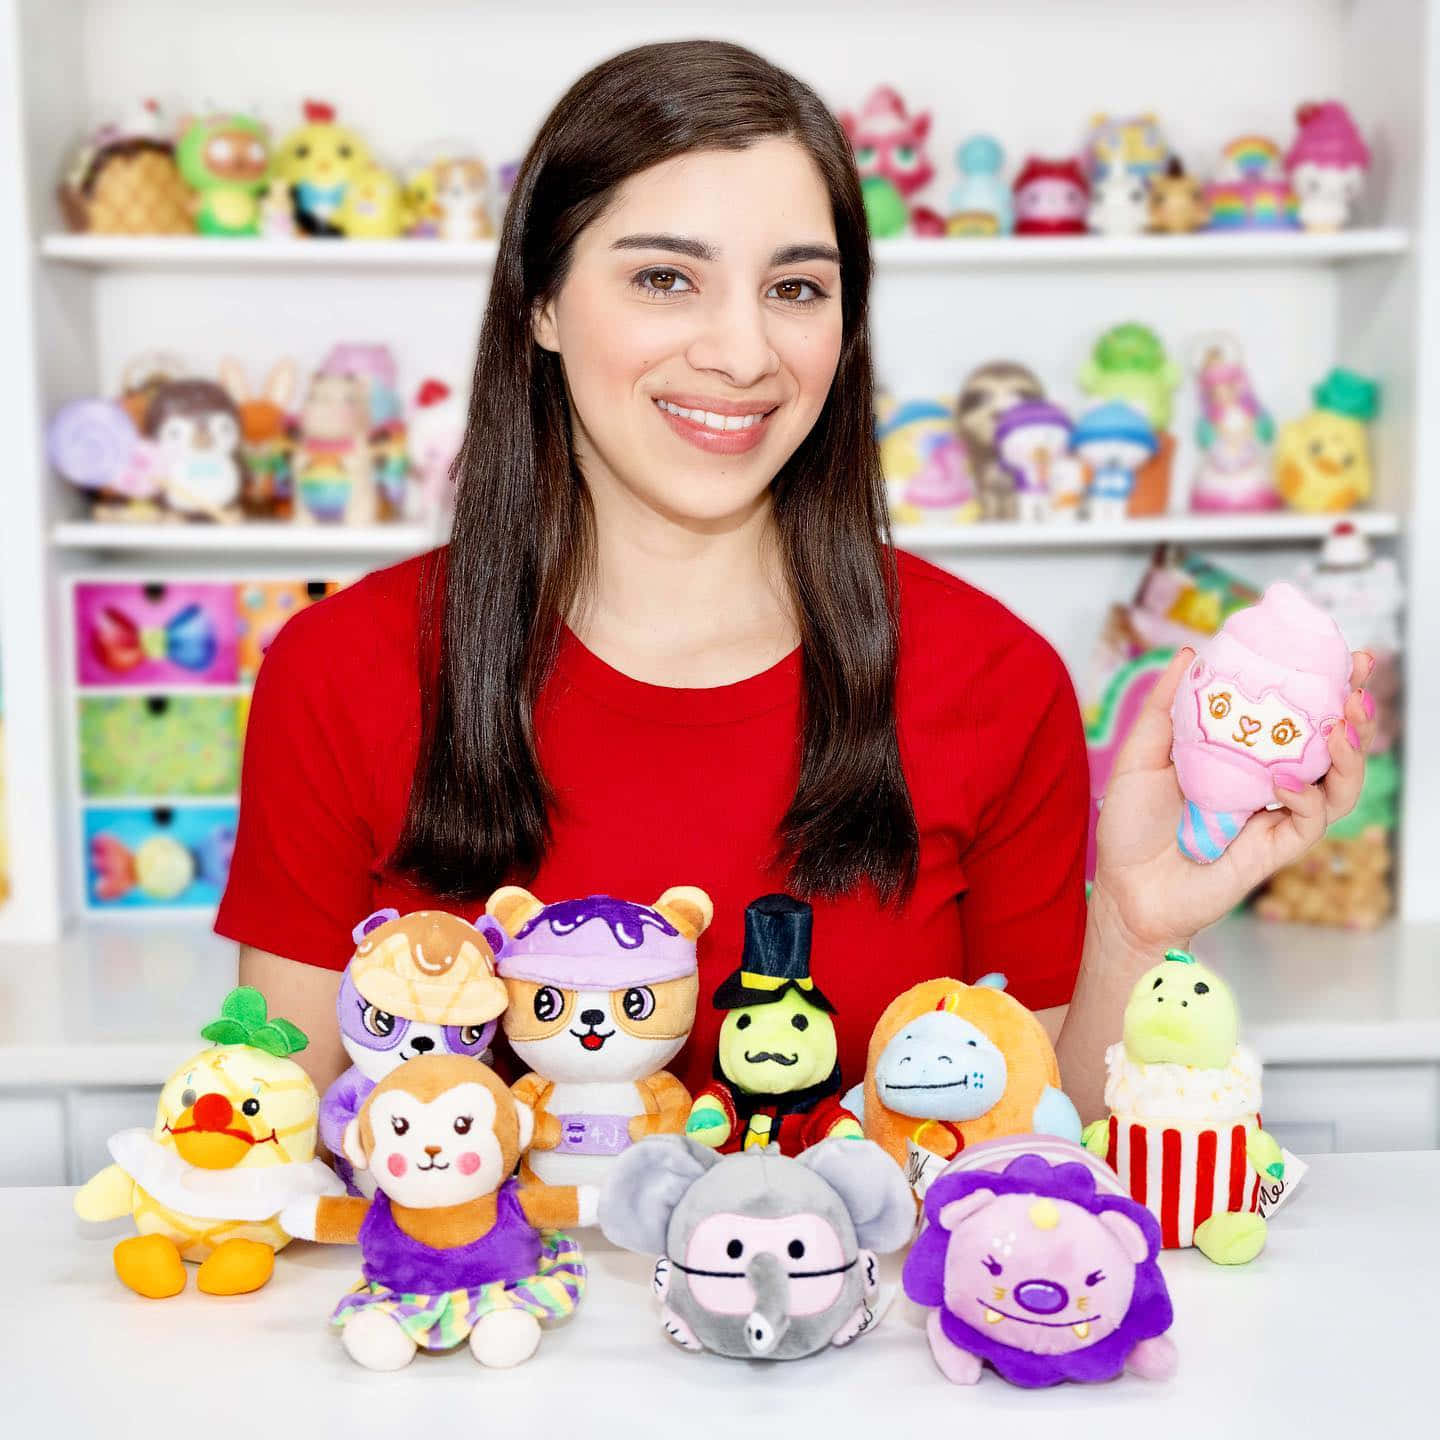 A Woman Is Holding A Bunch Of Stuffed Animals Wallpaper